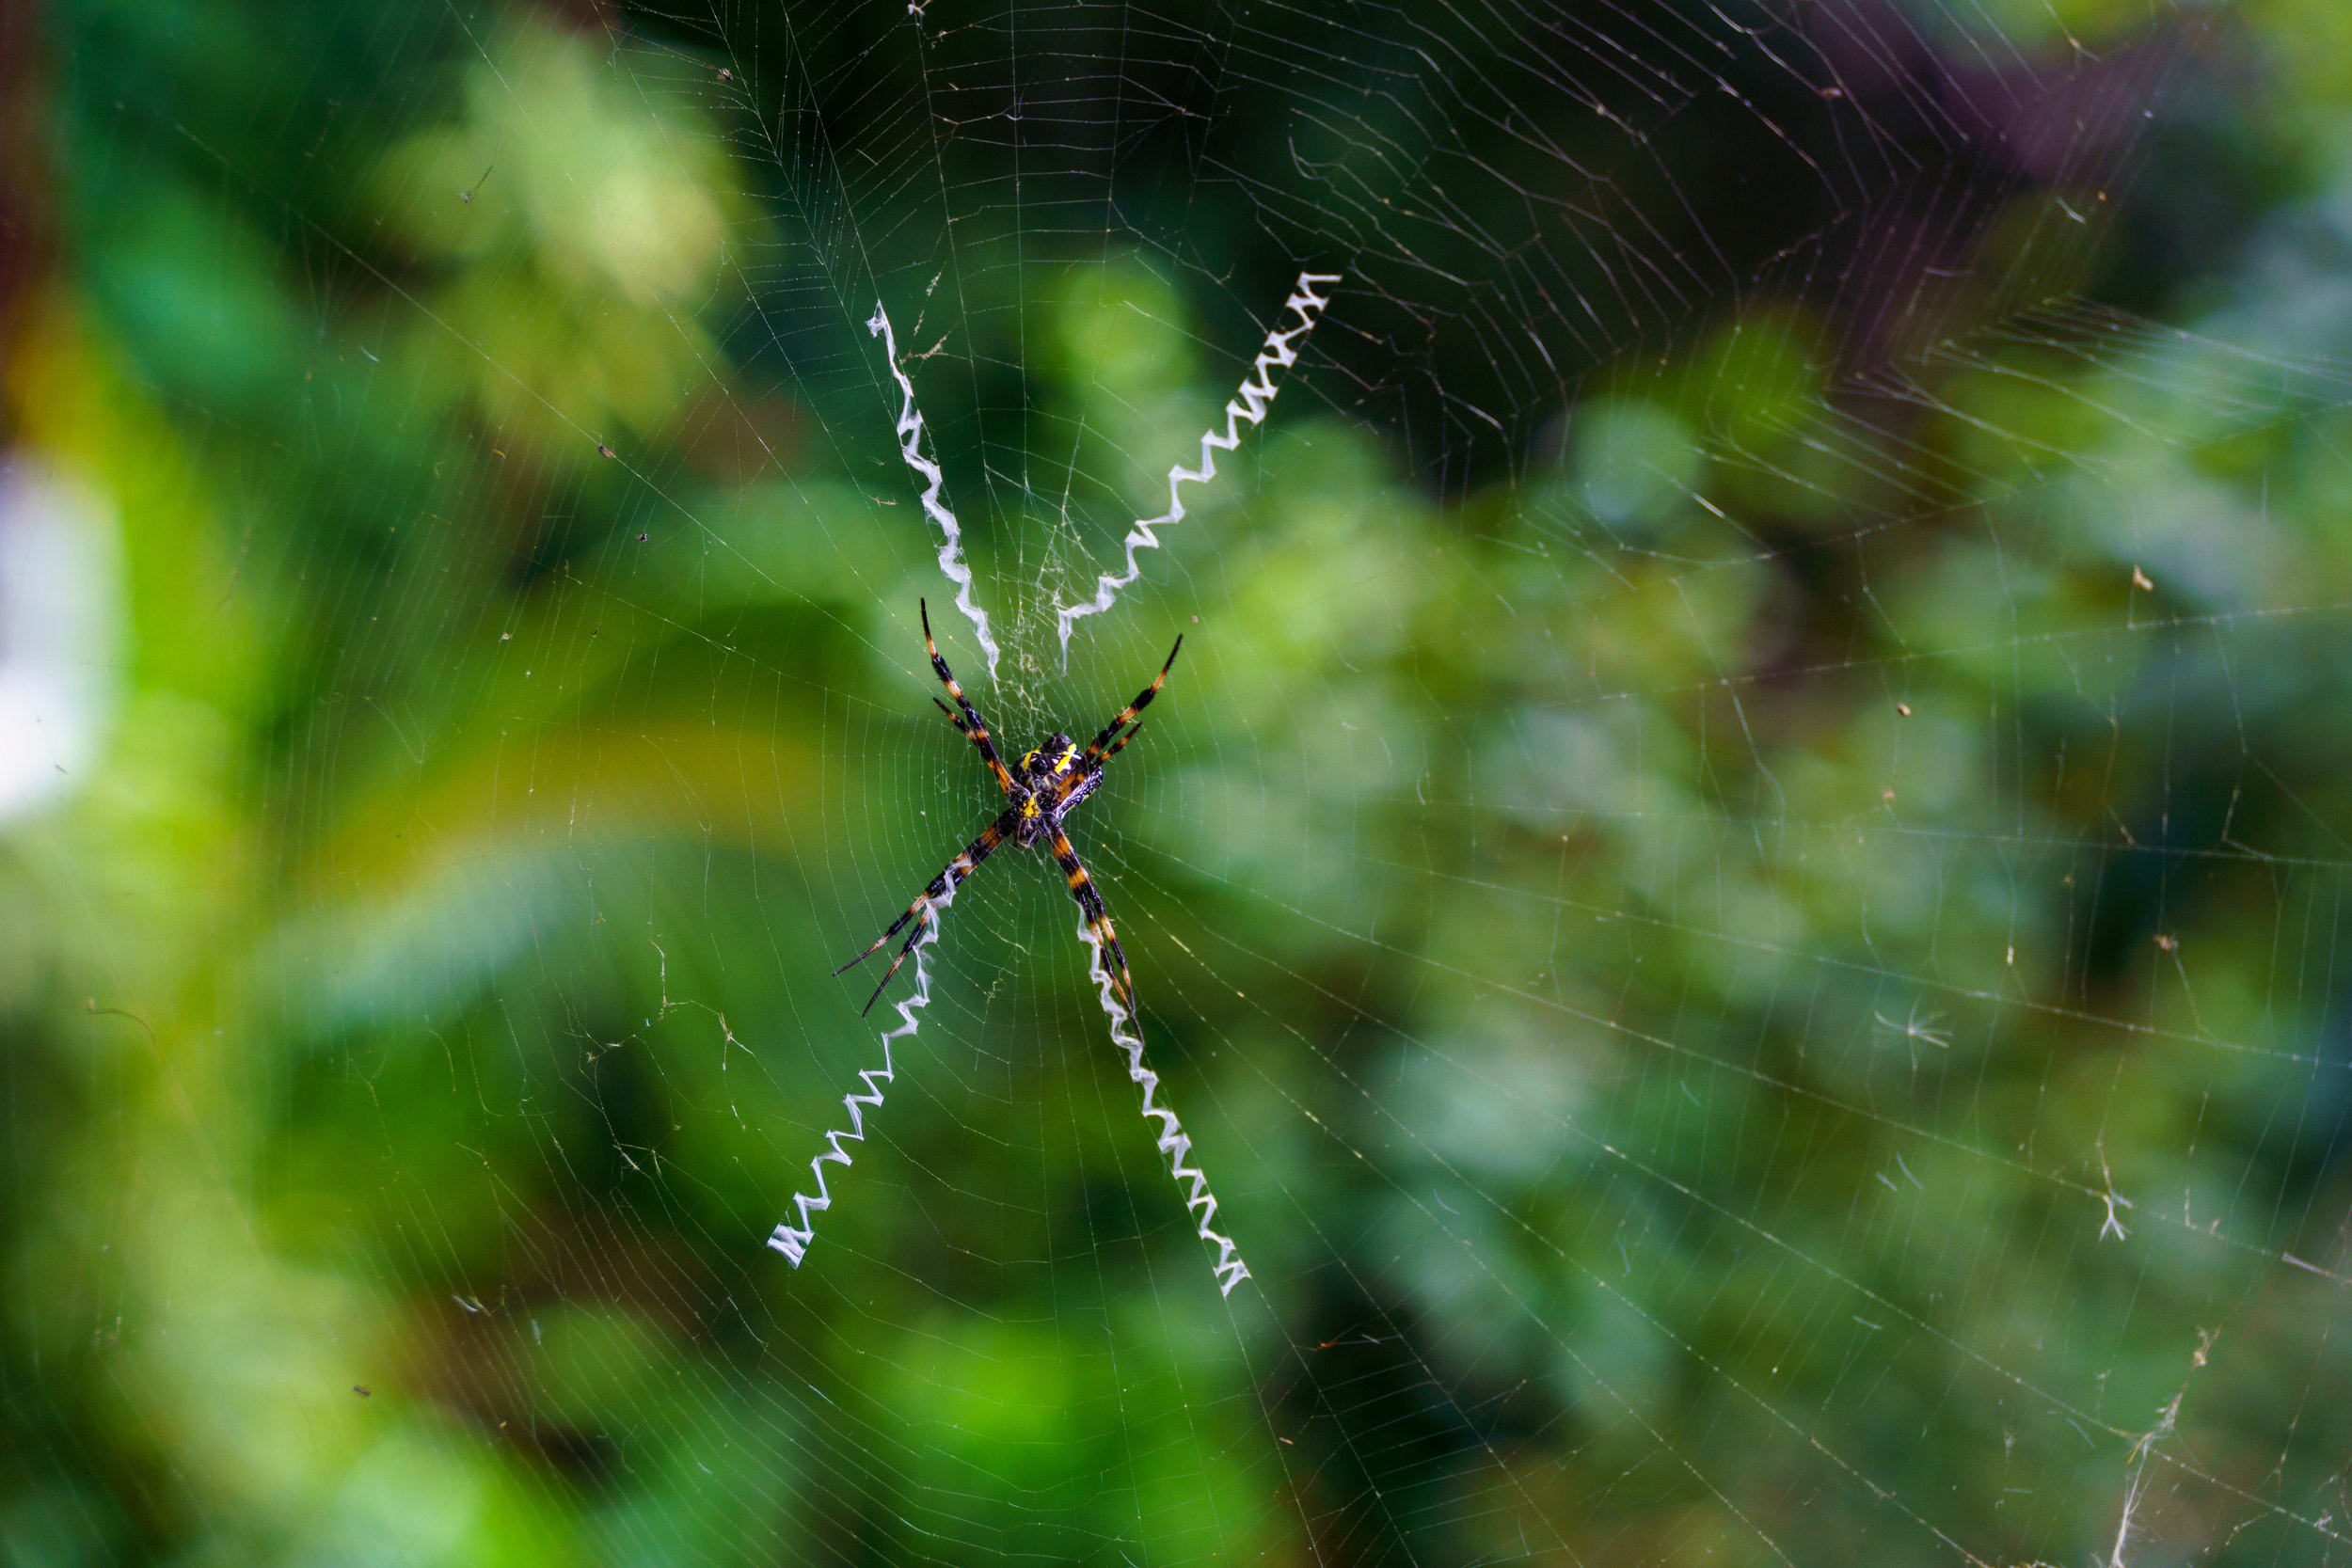  The spiders were equal parts harmless and alarming (photo/Jason Rafal) 